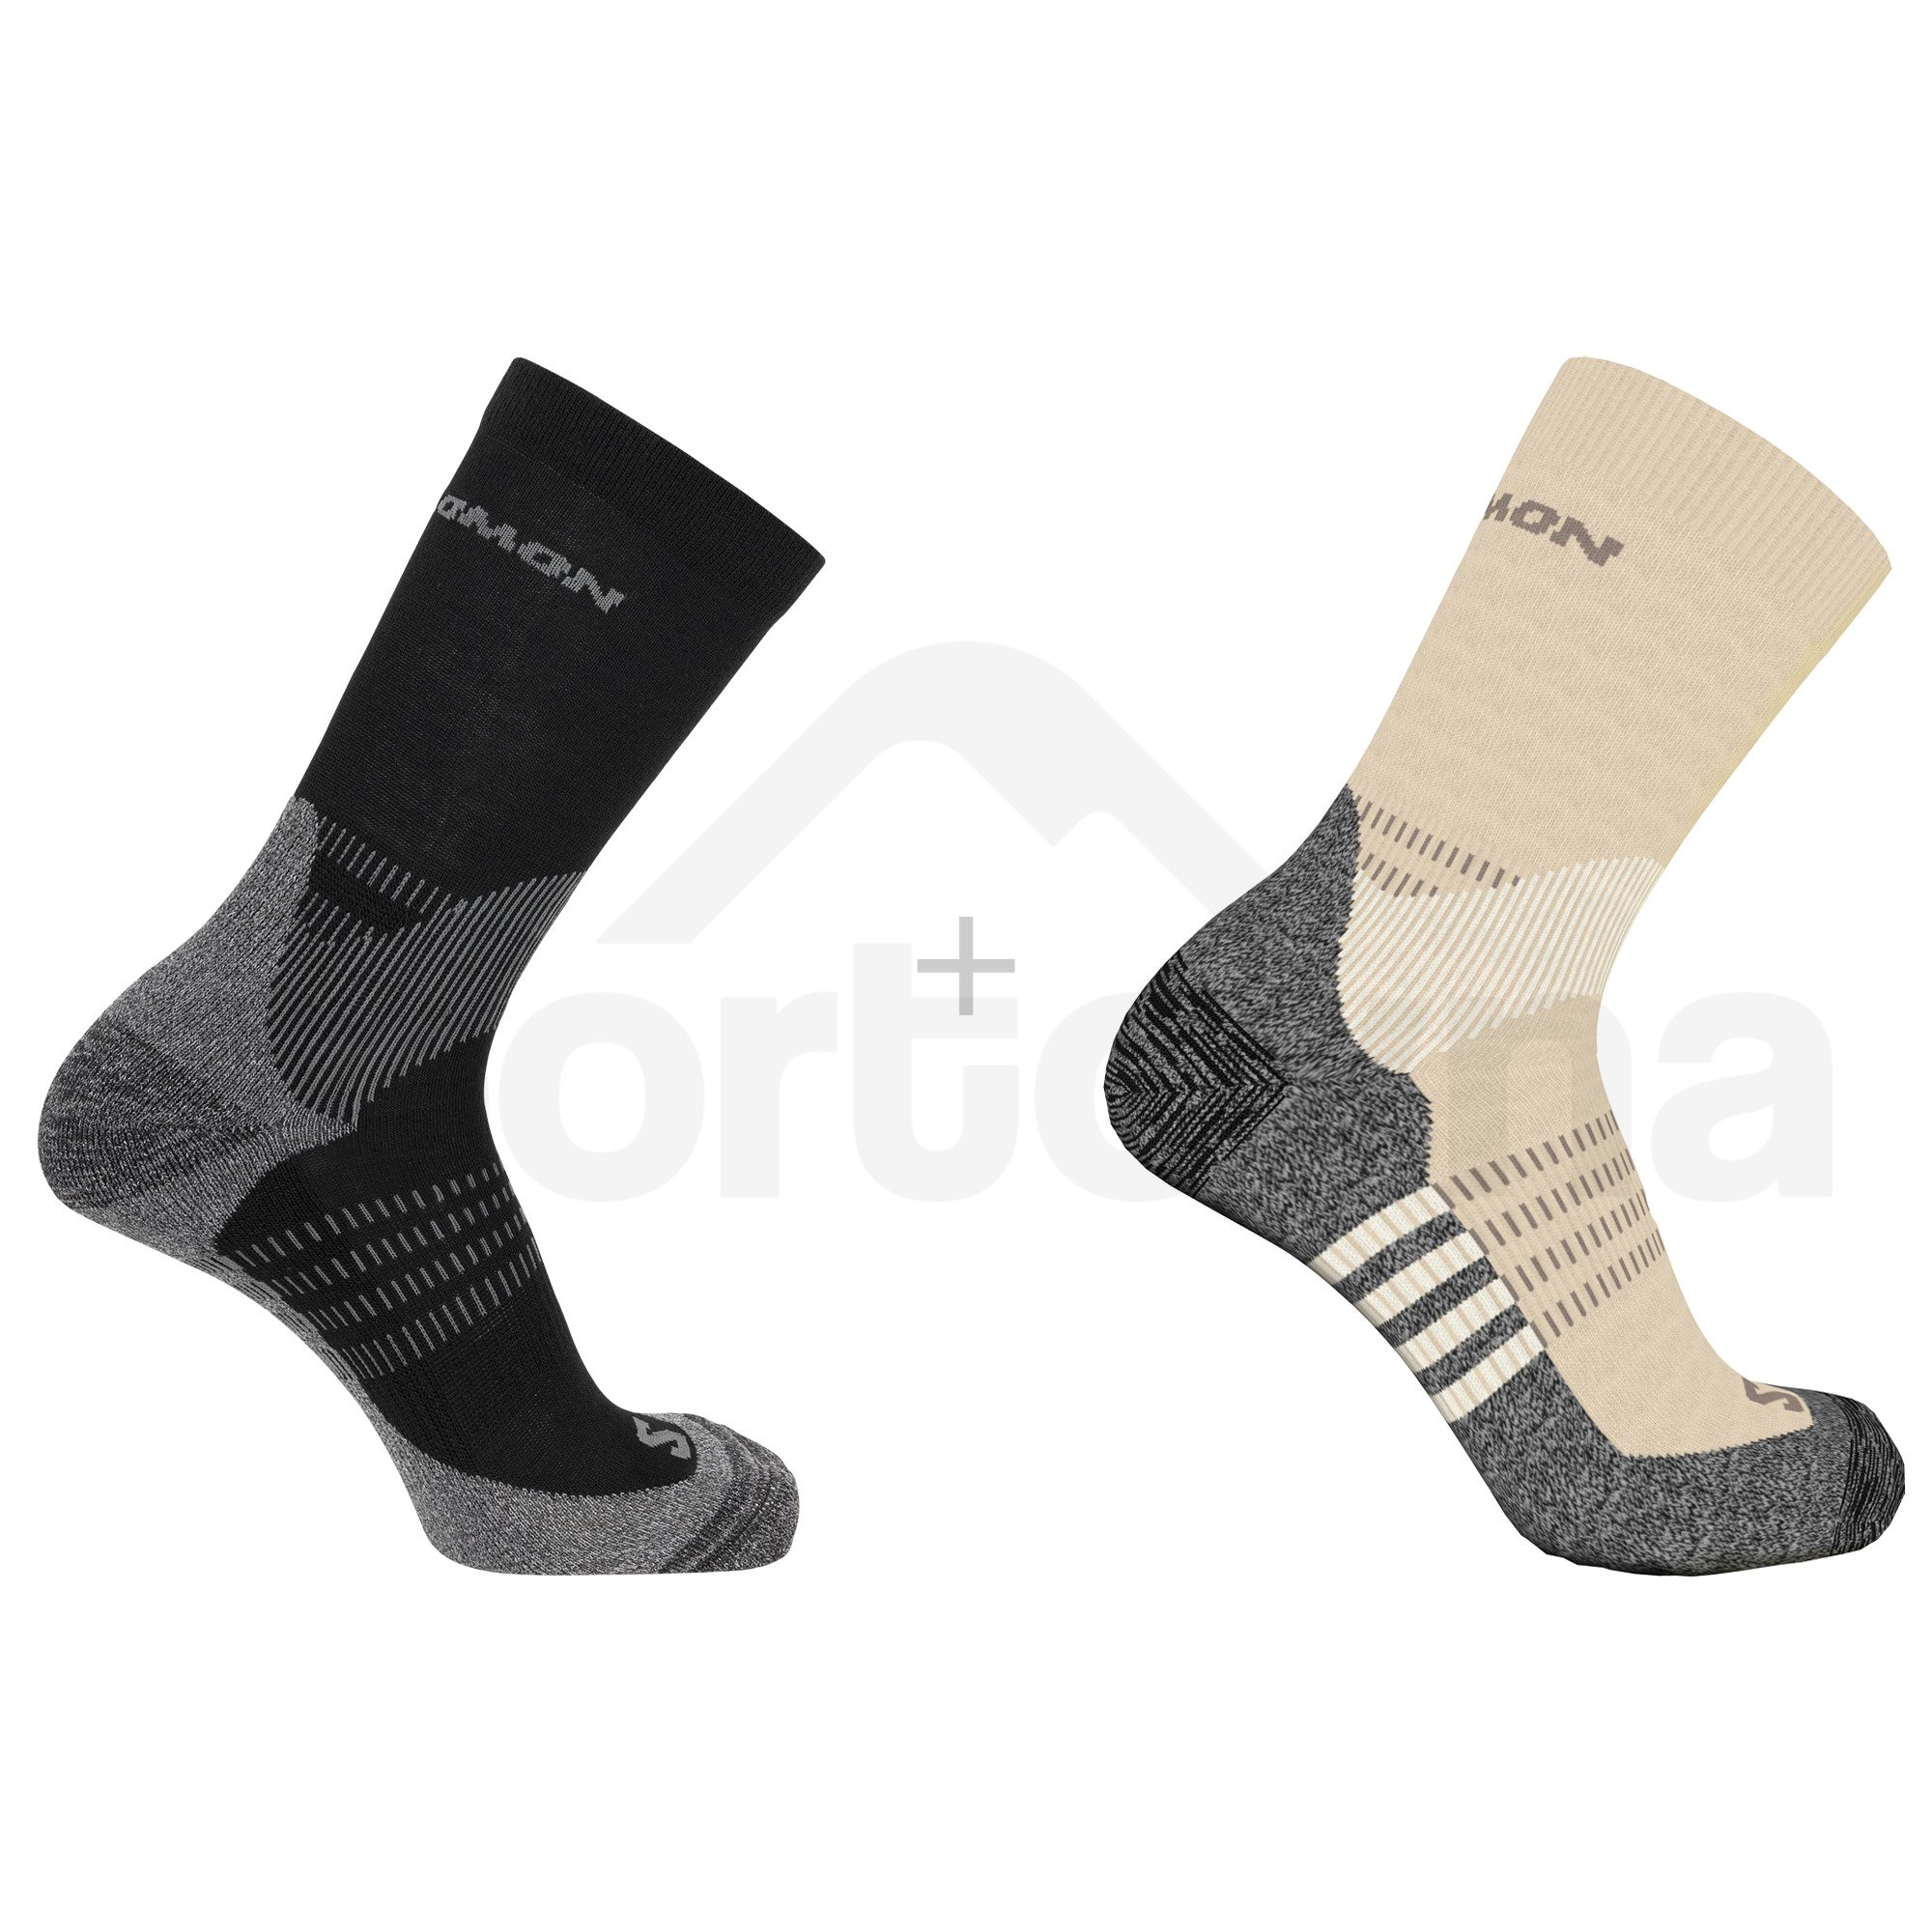 LC2256800_0_VIR_X ULTRA ACCESS CREW 2 PACK-Black-Bleached sand.png.high-res. jpeg